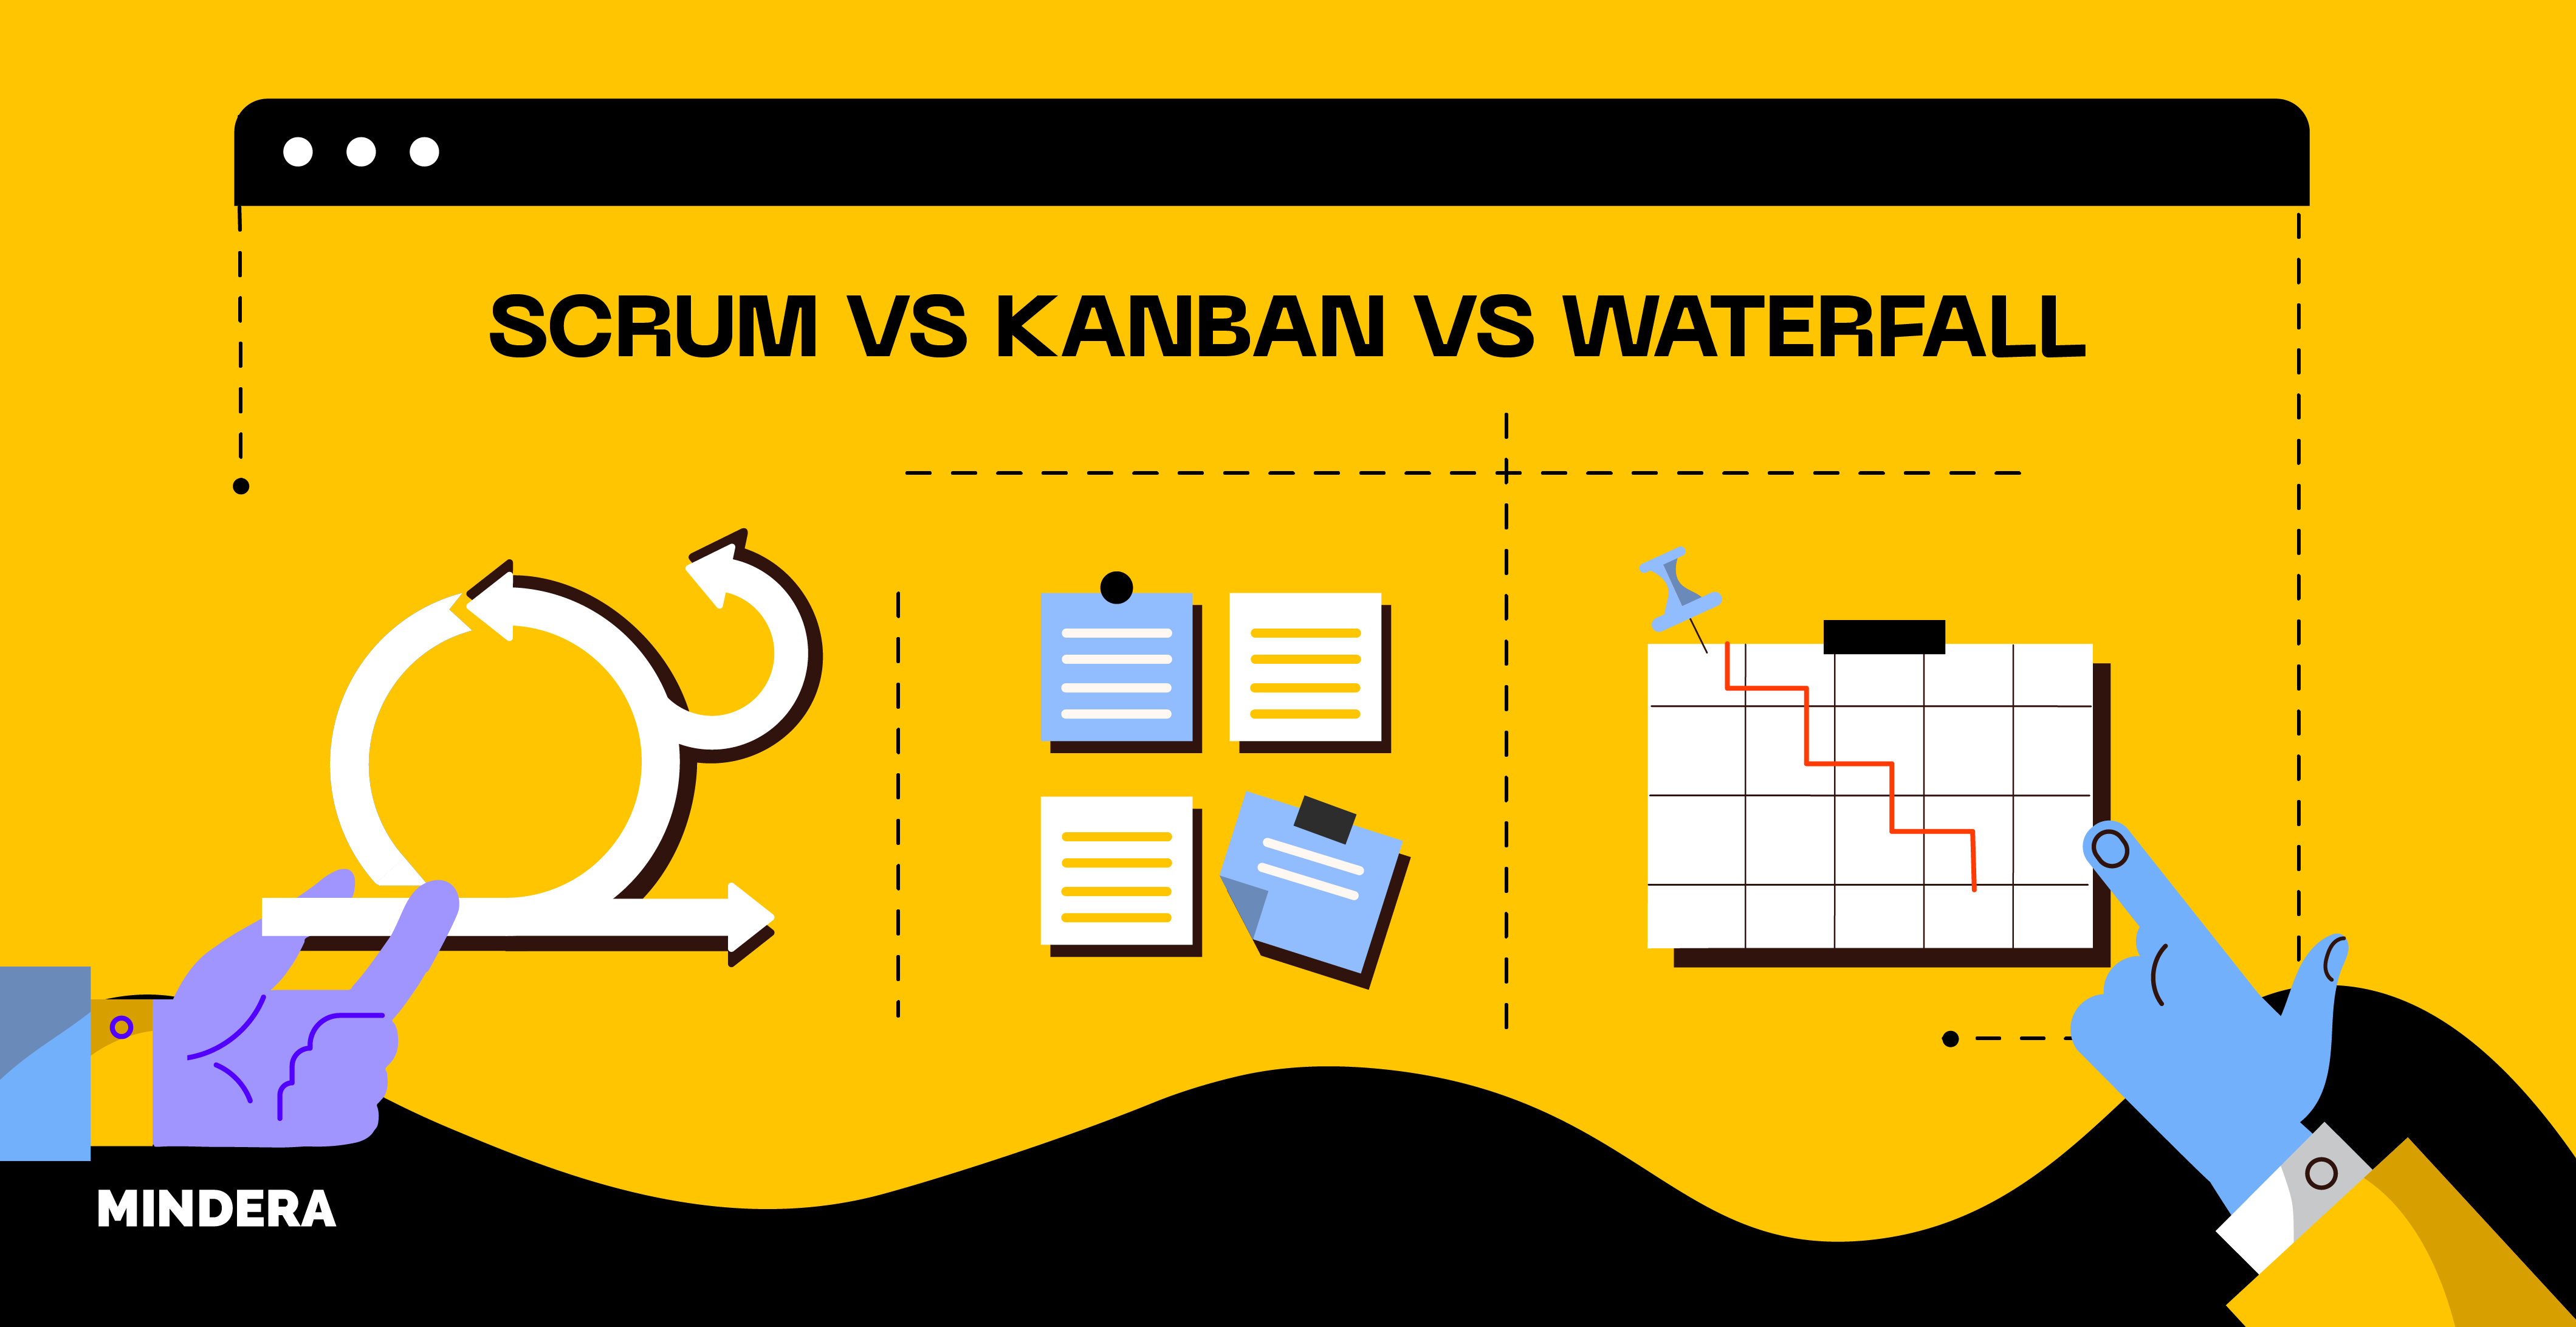 Scrum vs kanban vs waterfall, a colourful blog image with graphics of project management